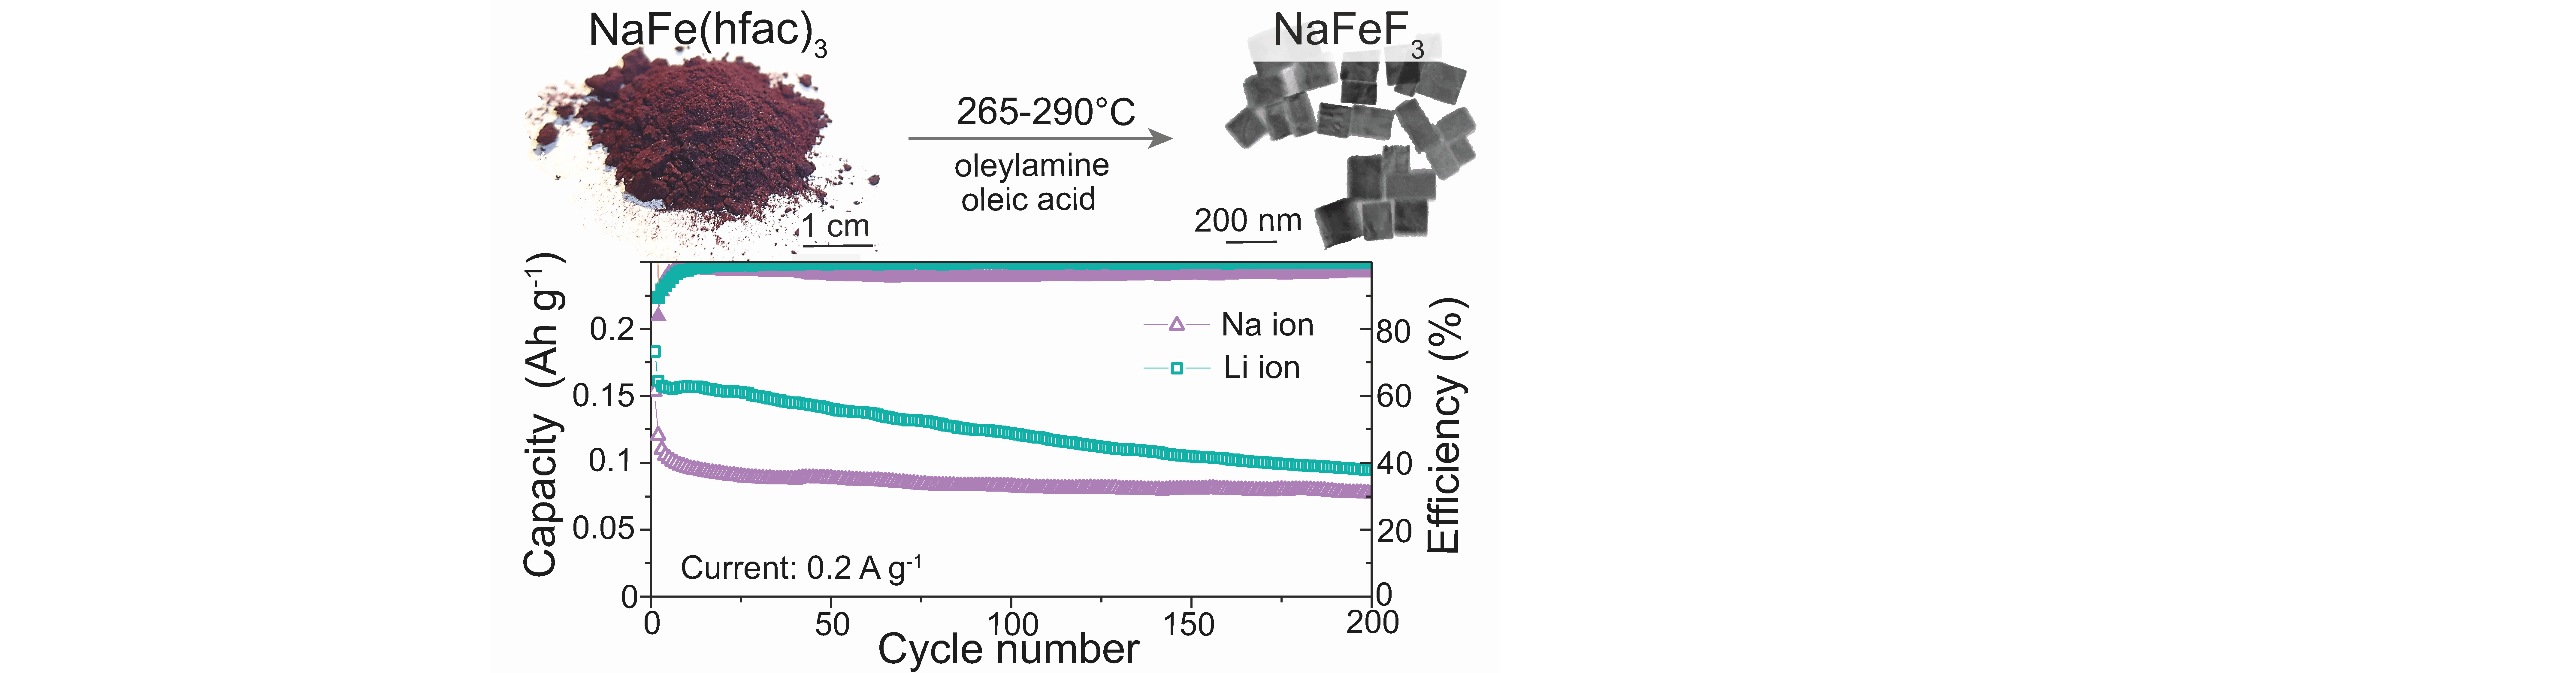 NaFeF3 Nanoplates as Low-Cost Sodium and Lithium Cathode Materials for Stationary Energy Storage